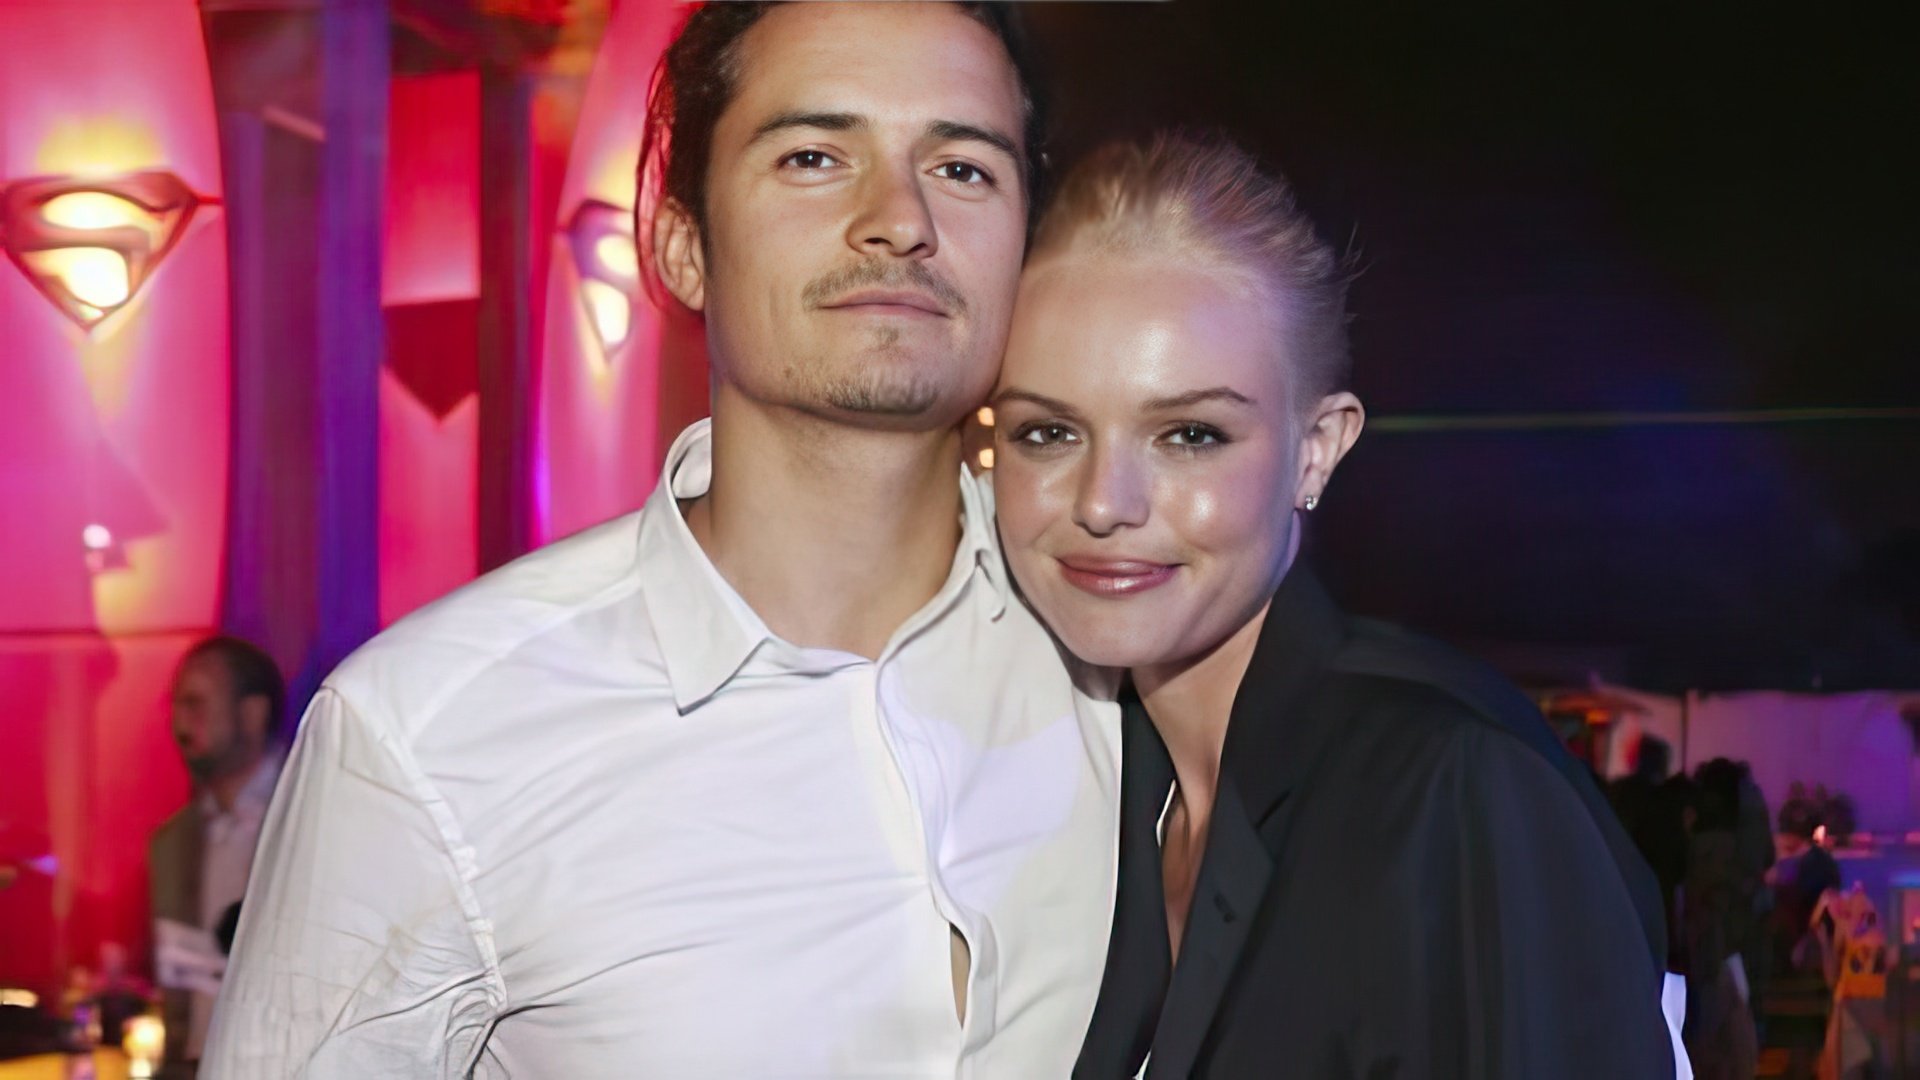 Orlando Bloom and Kate Bosworth shortly before parting